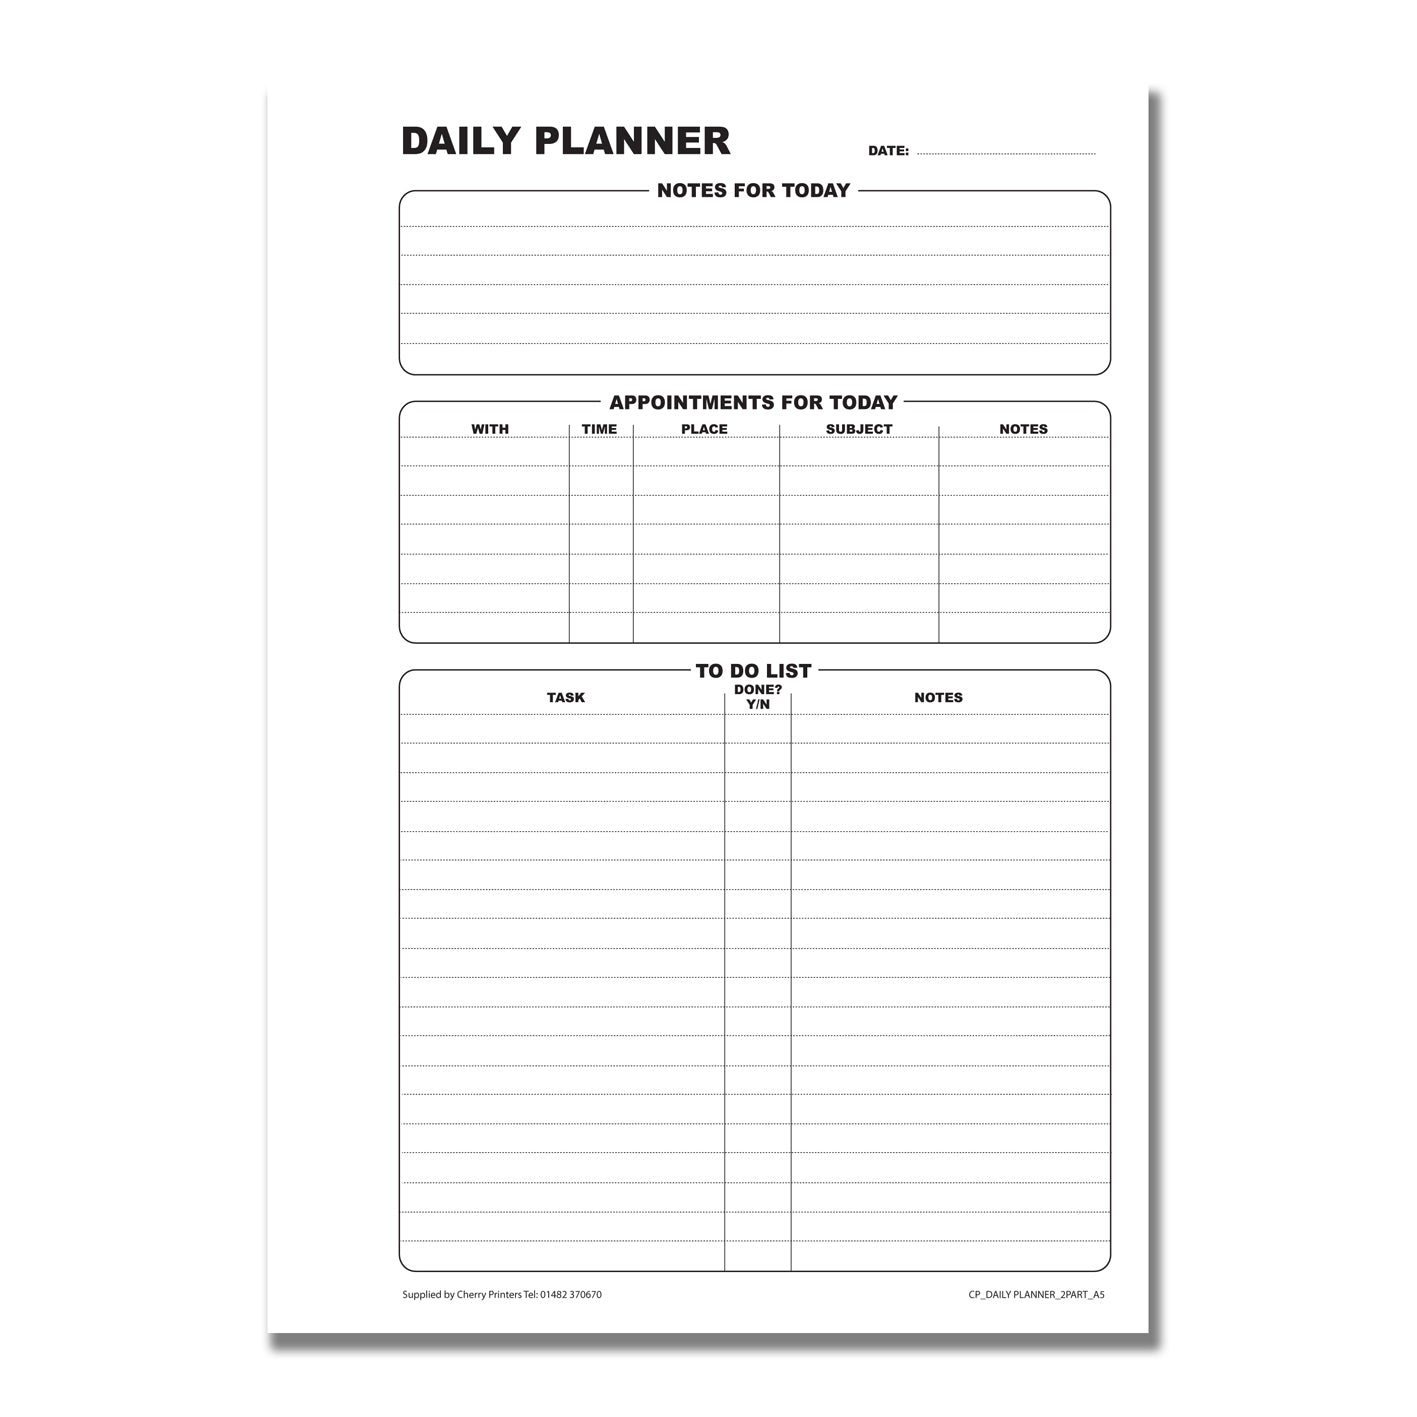 NCR Daily Planner / Things To Do Duplicate Book A5